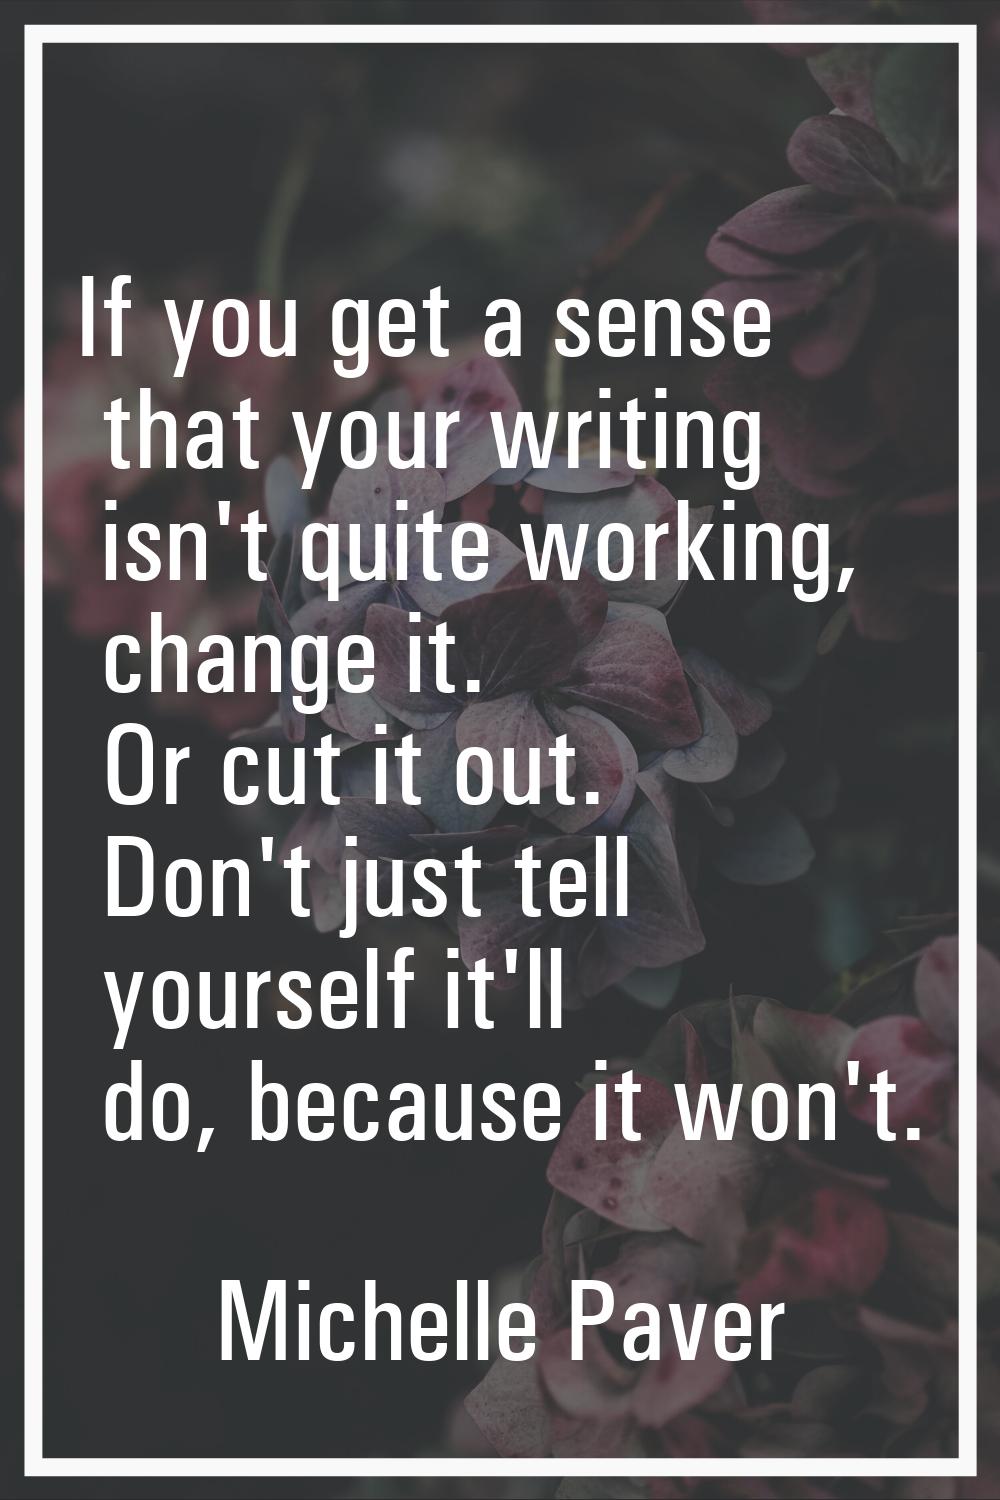 If you get a sense that your writing isn't quite working, change it. Or cut it out. Don't just tell